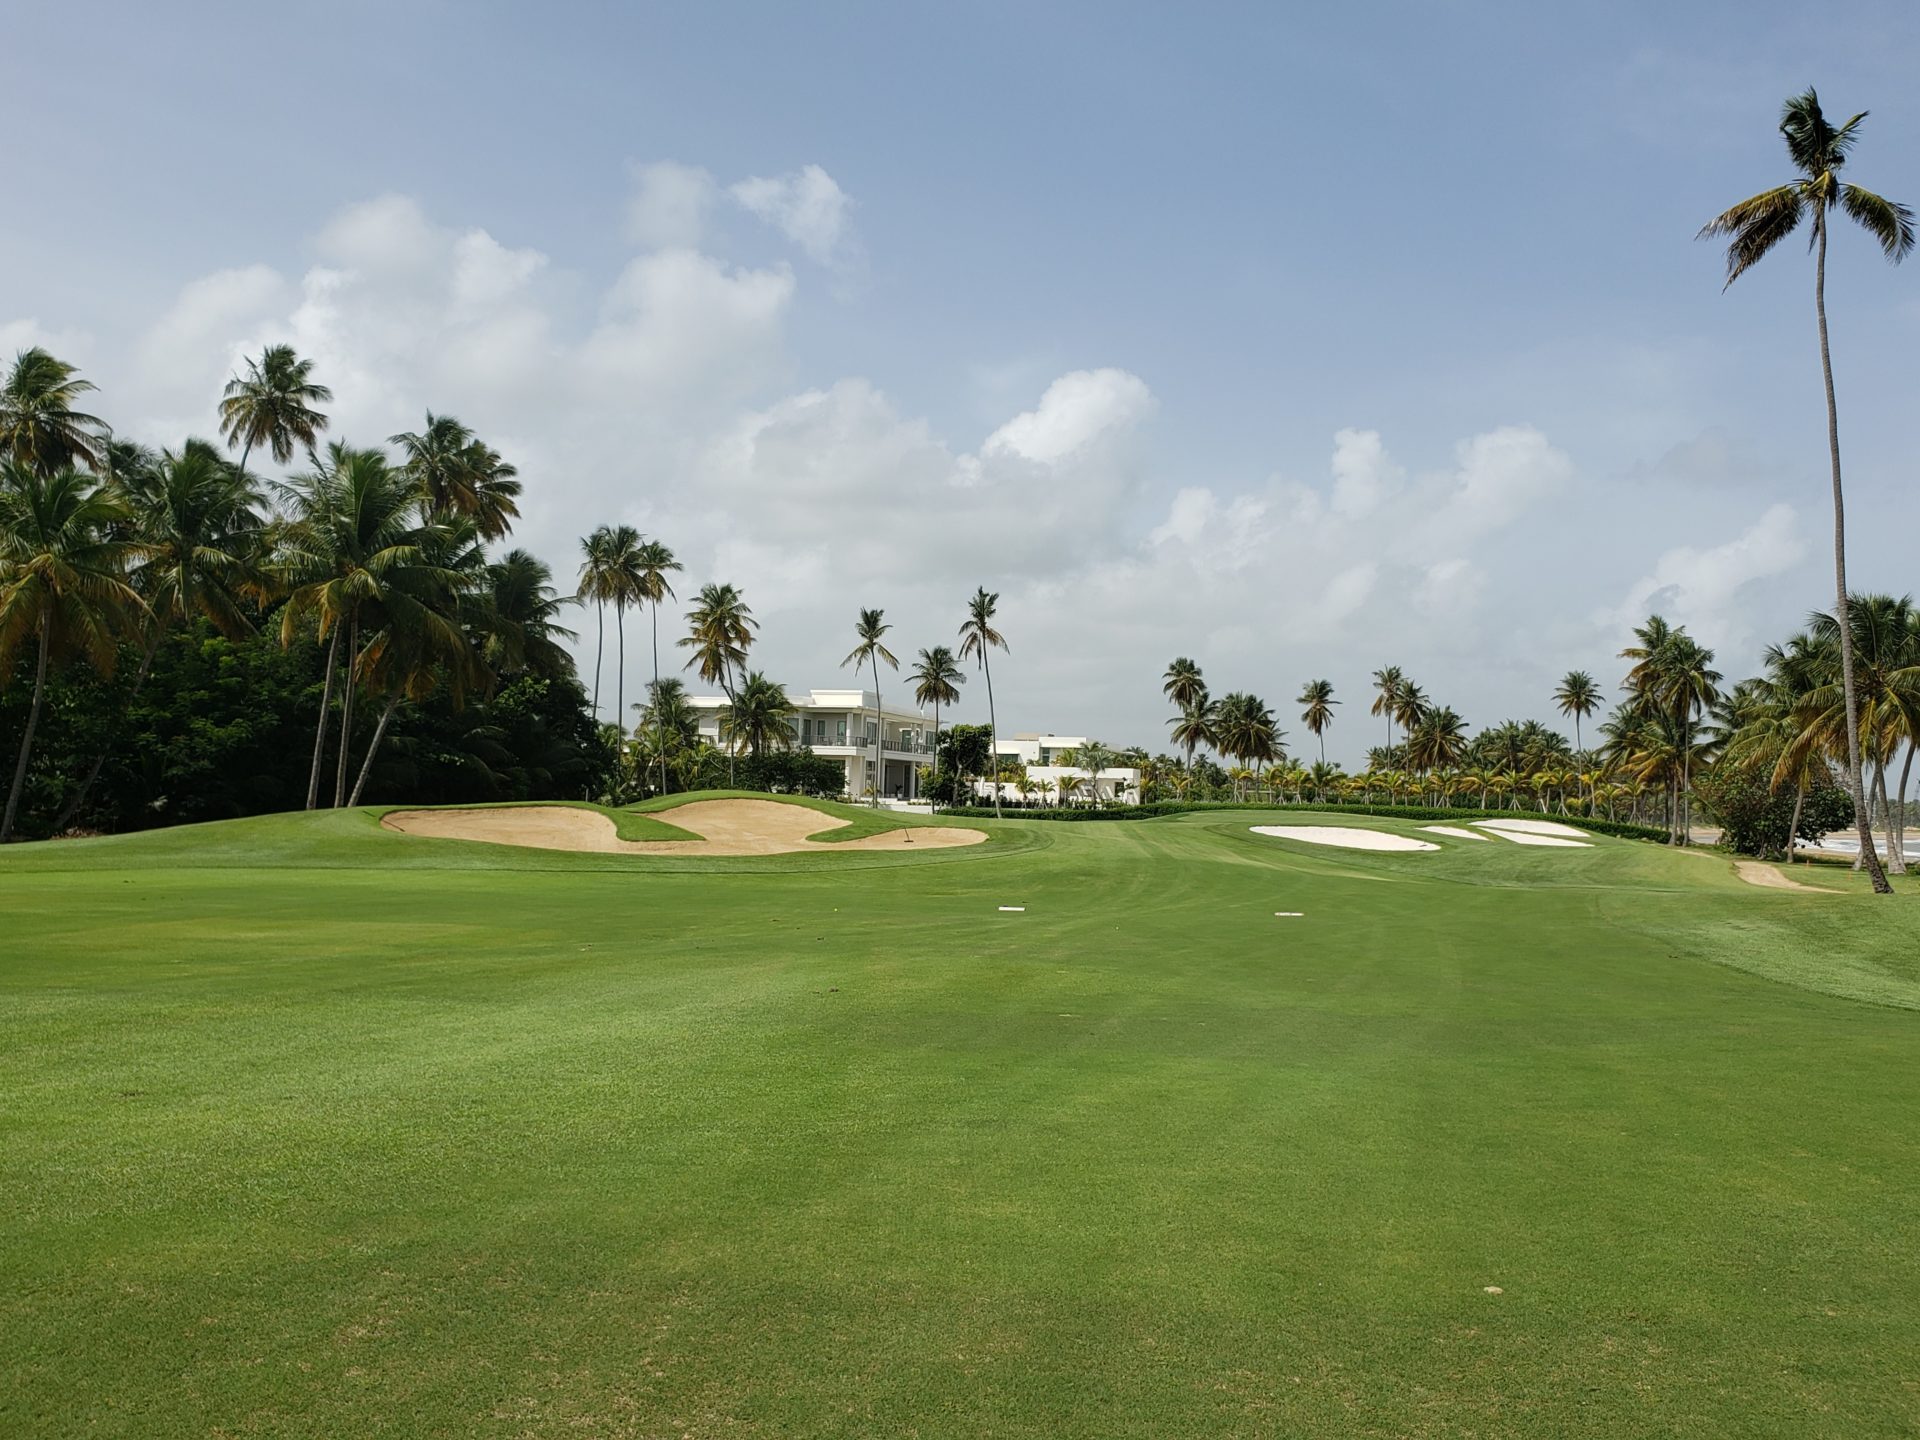 a golf course with palm trees and a house